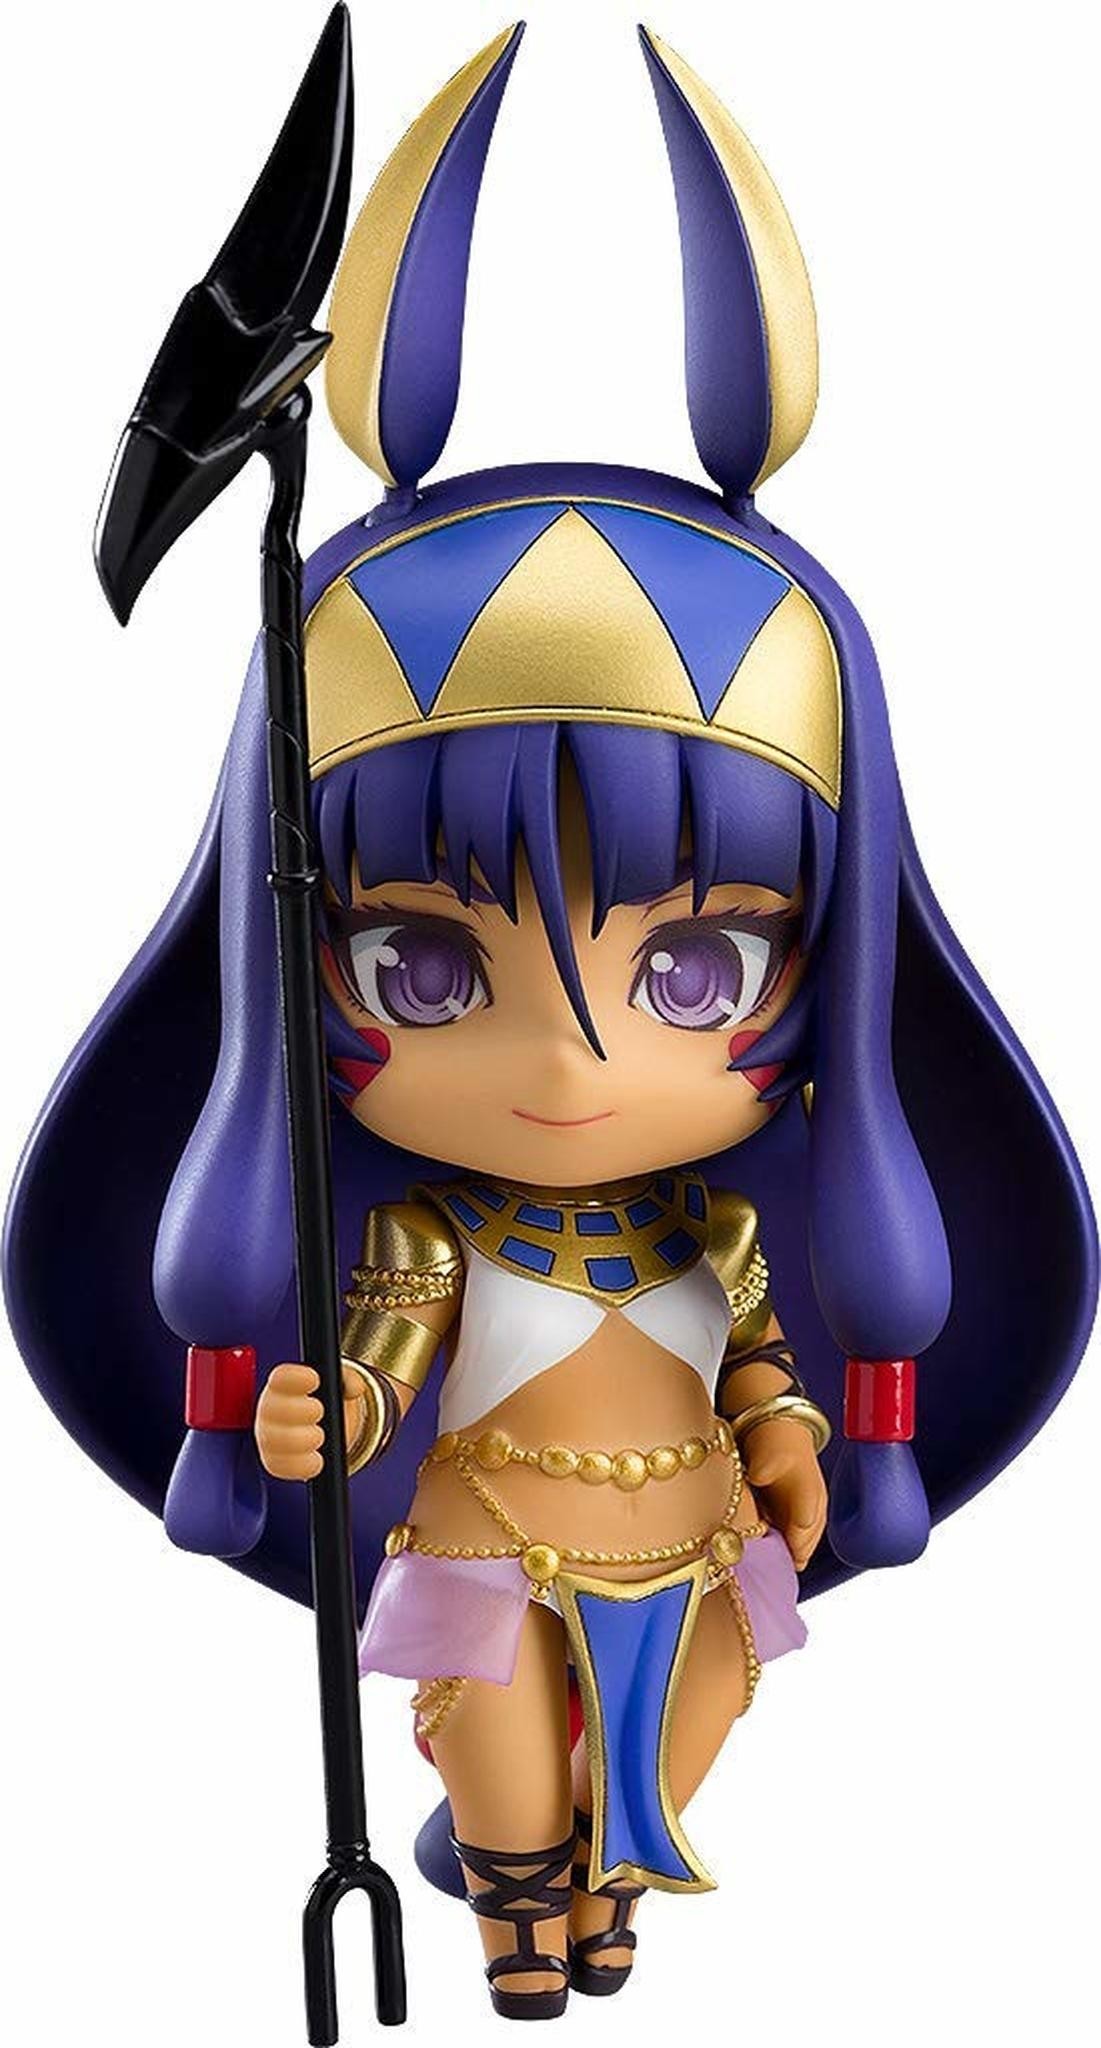 Fate/Grand Order Nendoroid Action Figure - Caster / Nitocris